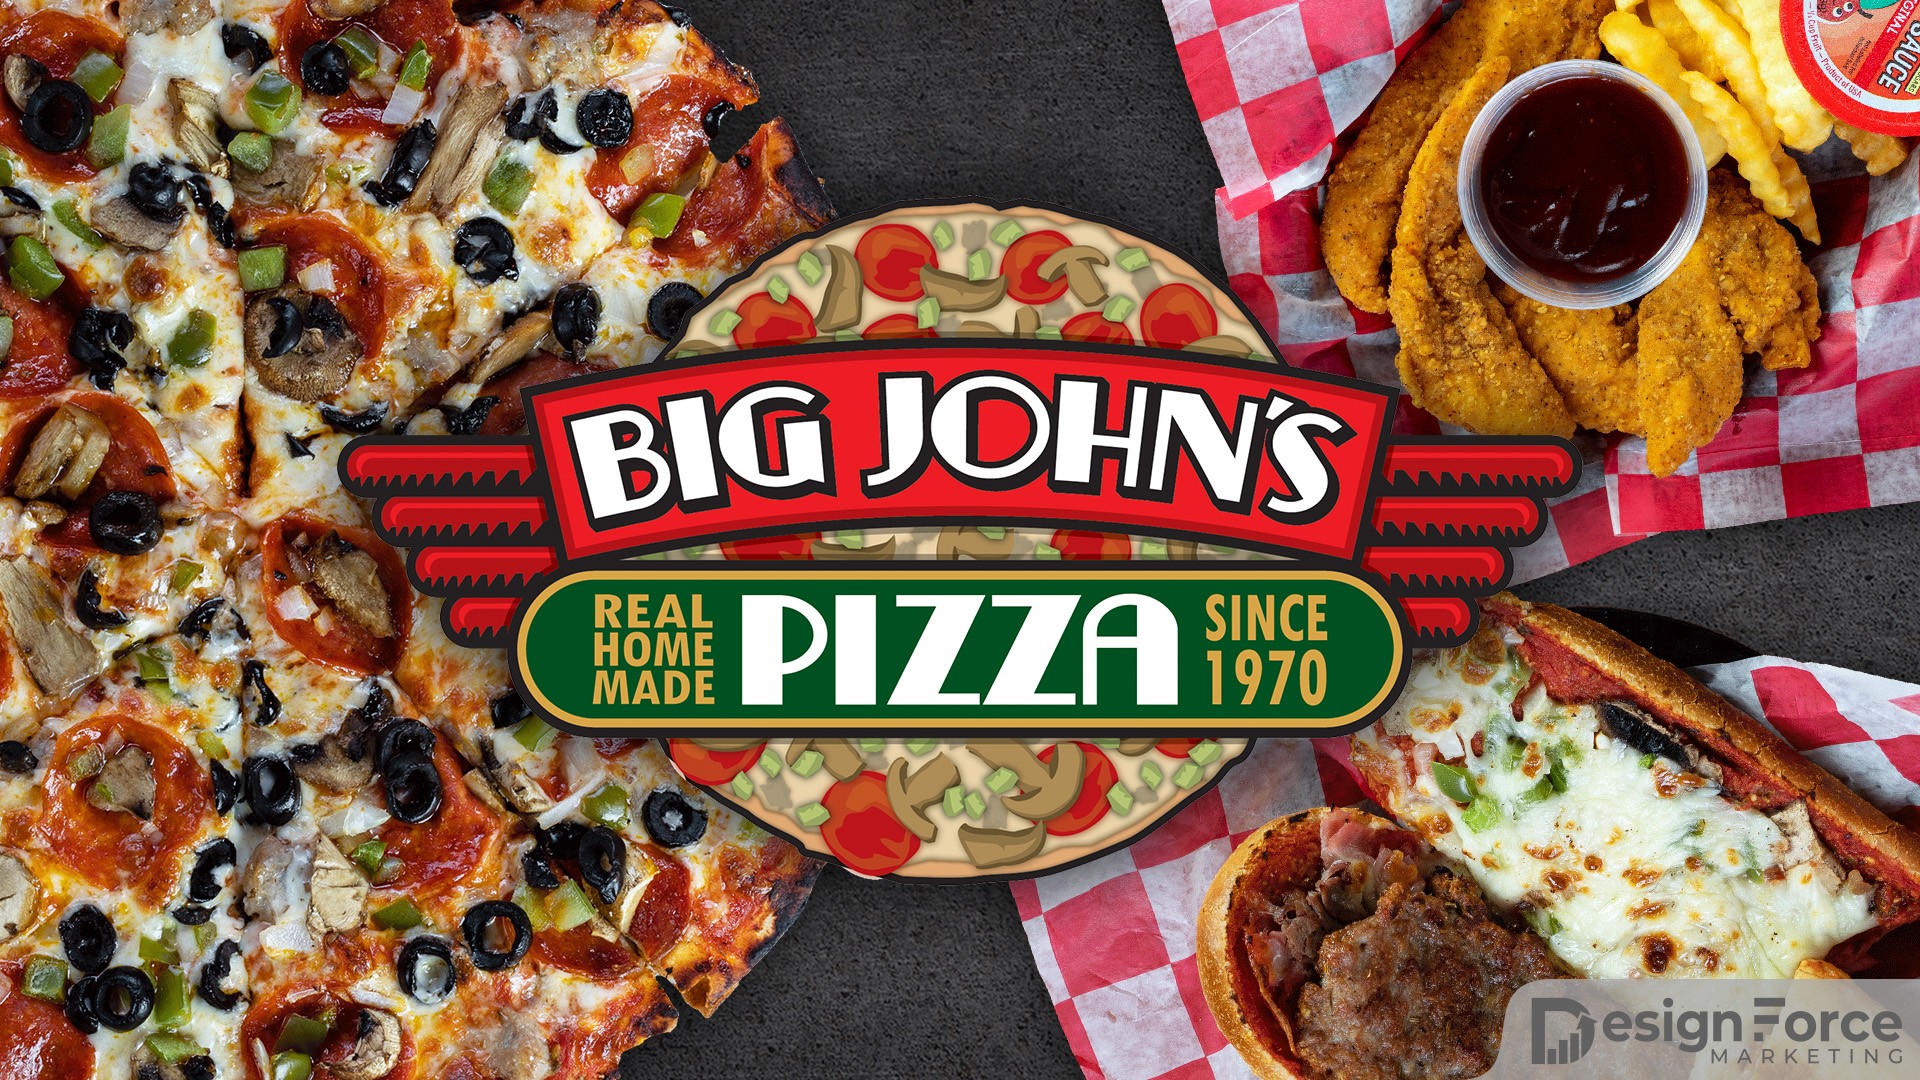 Big Johns Pizza Top Rated Pizza in photo